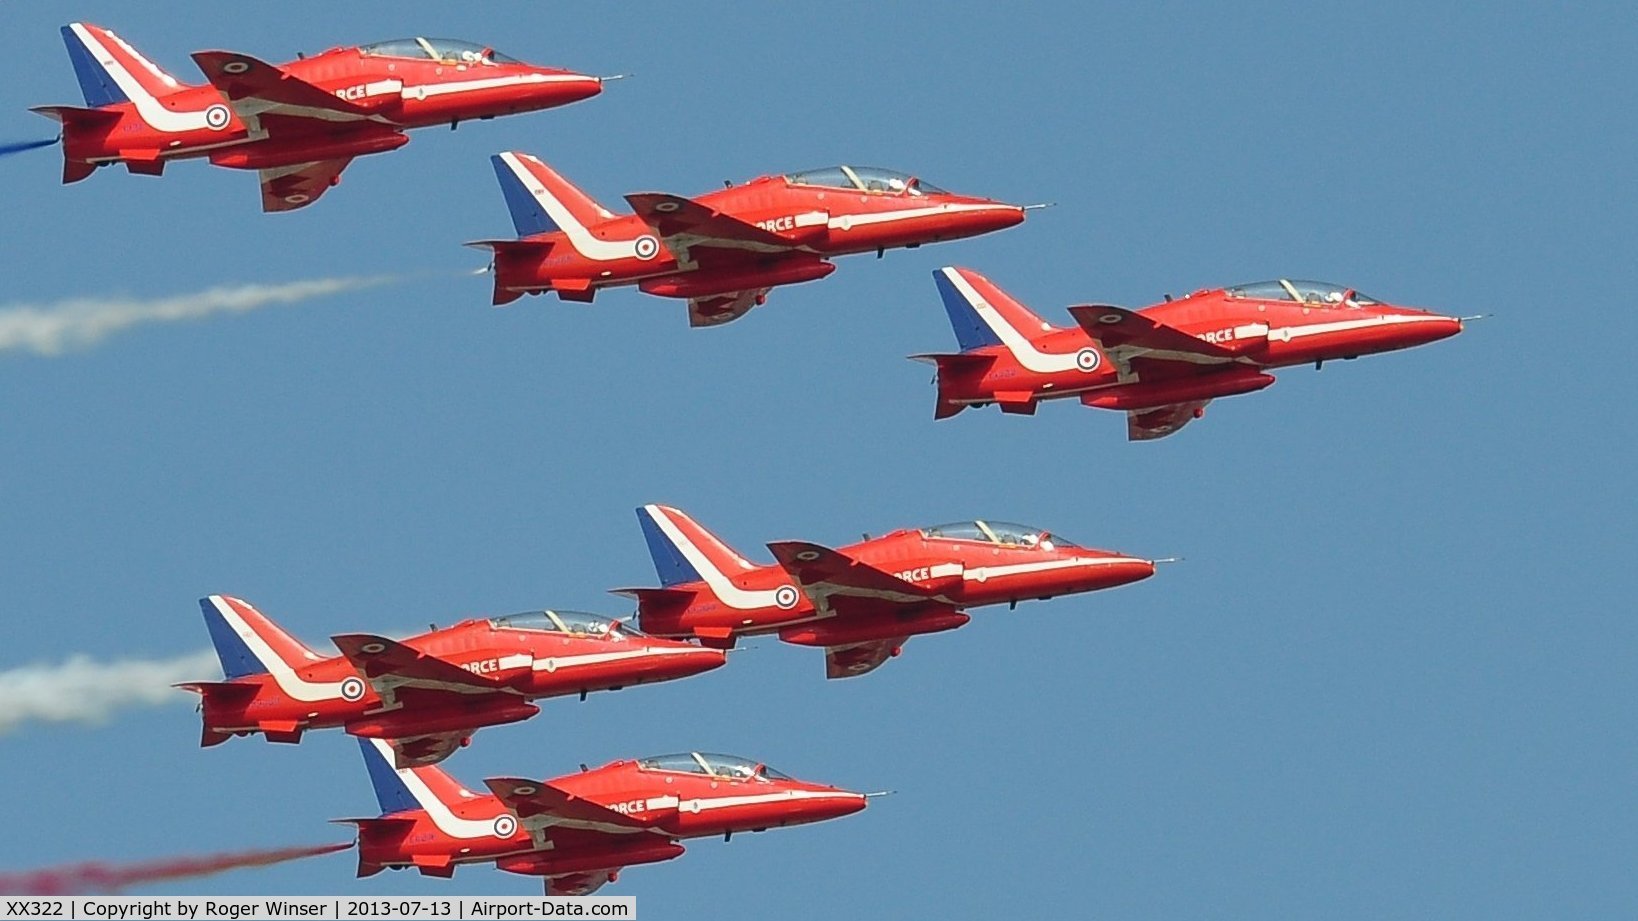 XX322, 1980 Hawker Siddeley Hawk T.1A C/N 165/312147, Off airport. Leading the RAF Red Arrows on the first day of the Wales National Air Show, Swansea Bay, UK. Red 1 is flown by Squadron Leader Jim Turner.